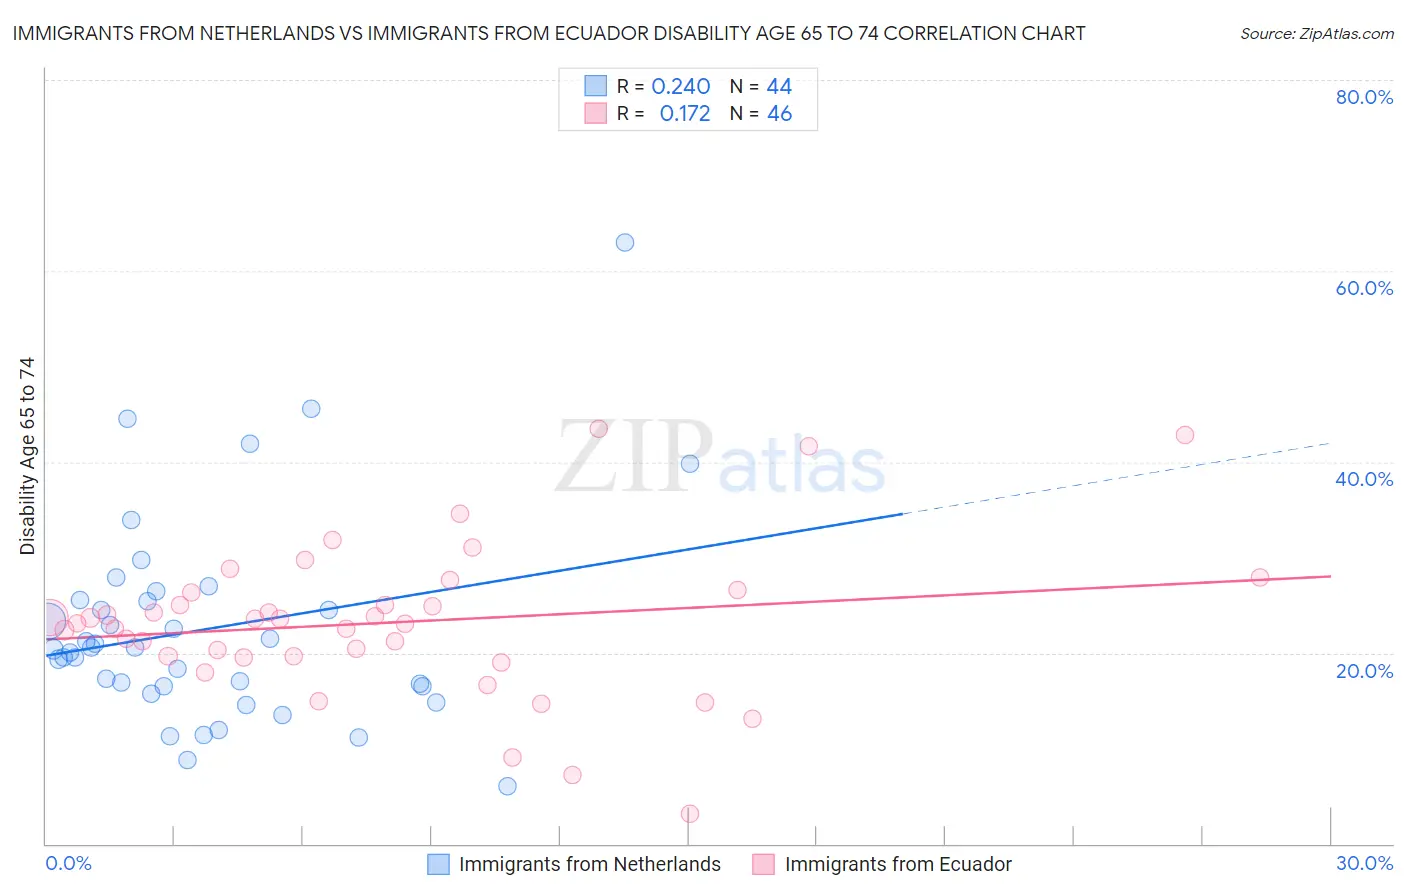 Immigrants from Netherlands vs Immigrants from Ecuador Disability Age 65 to 74